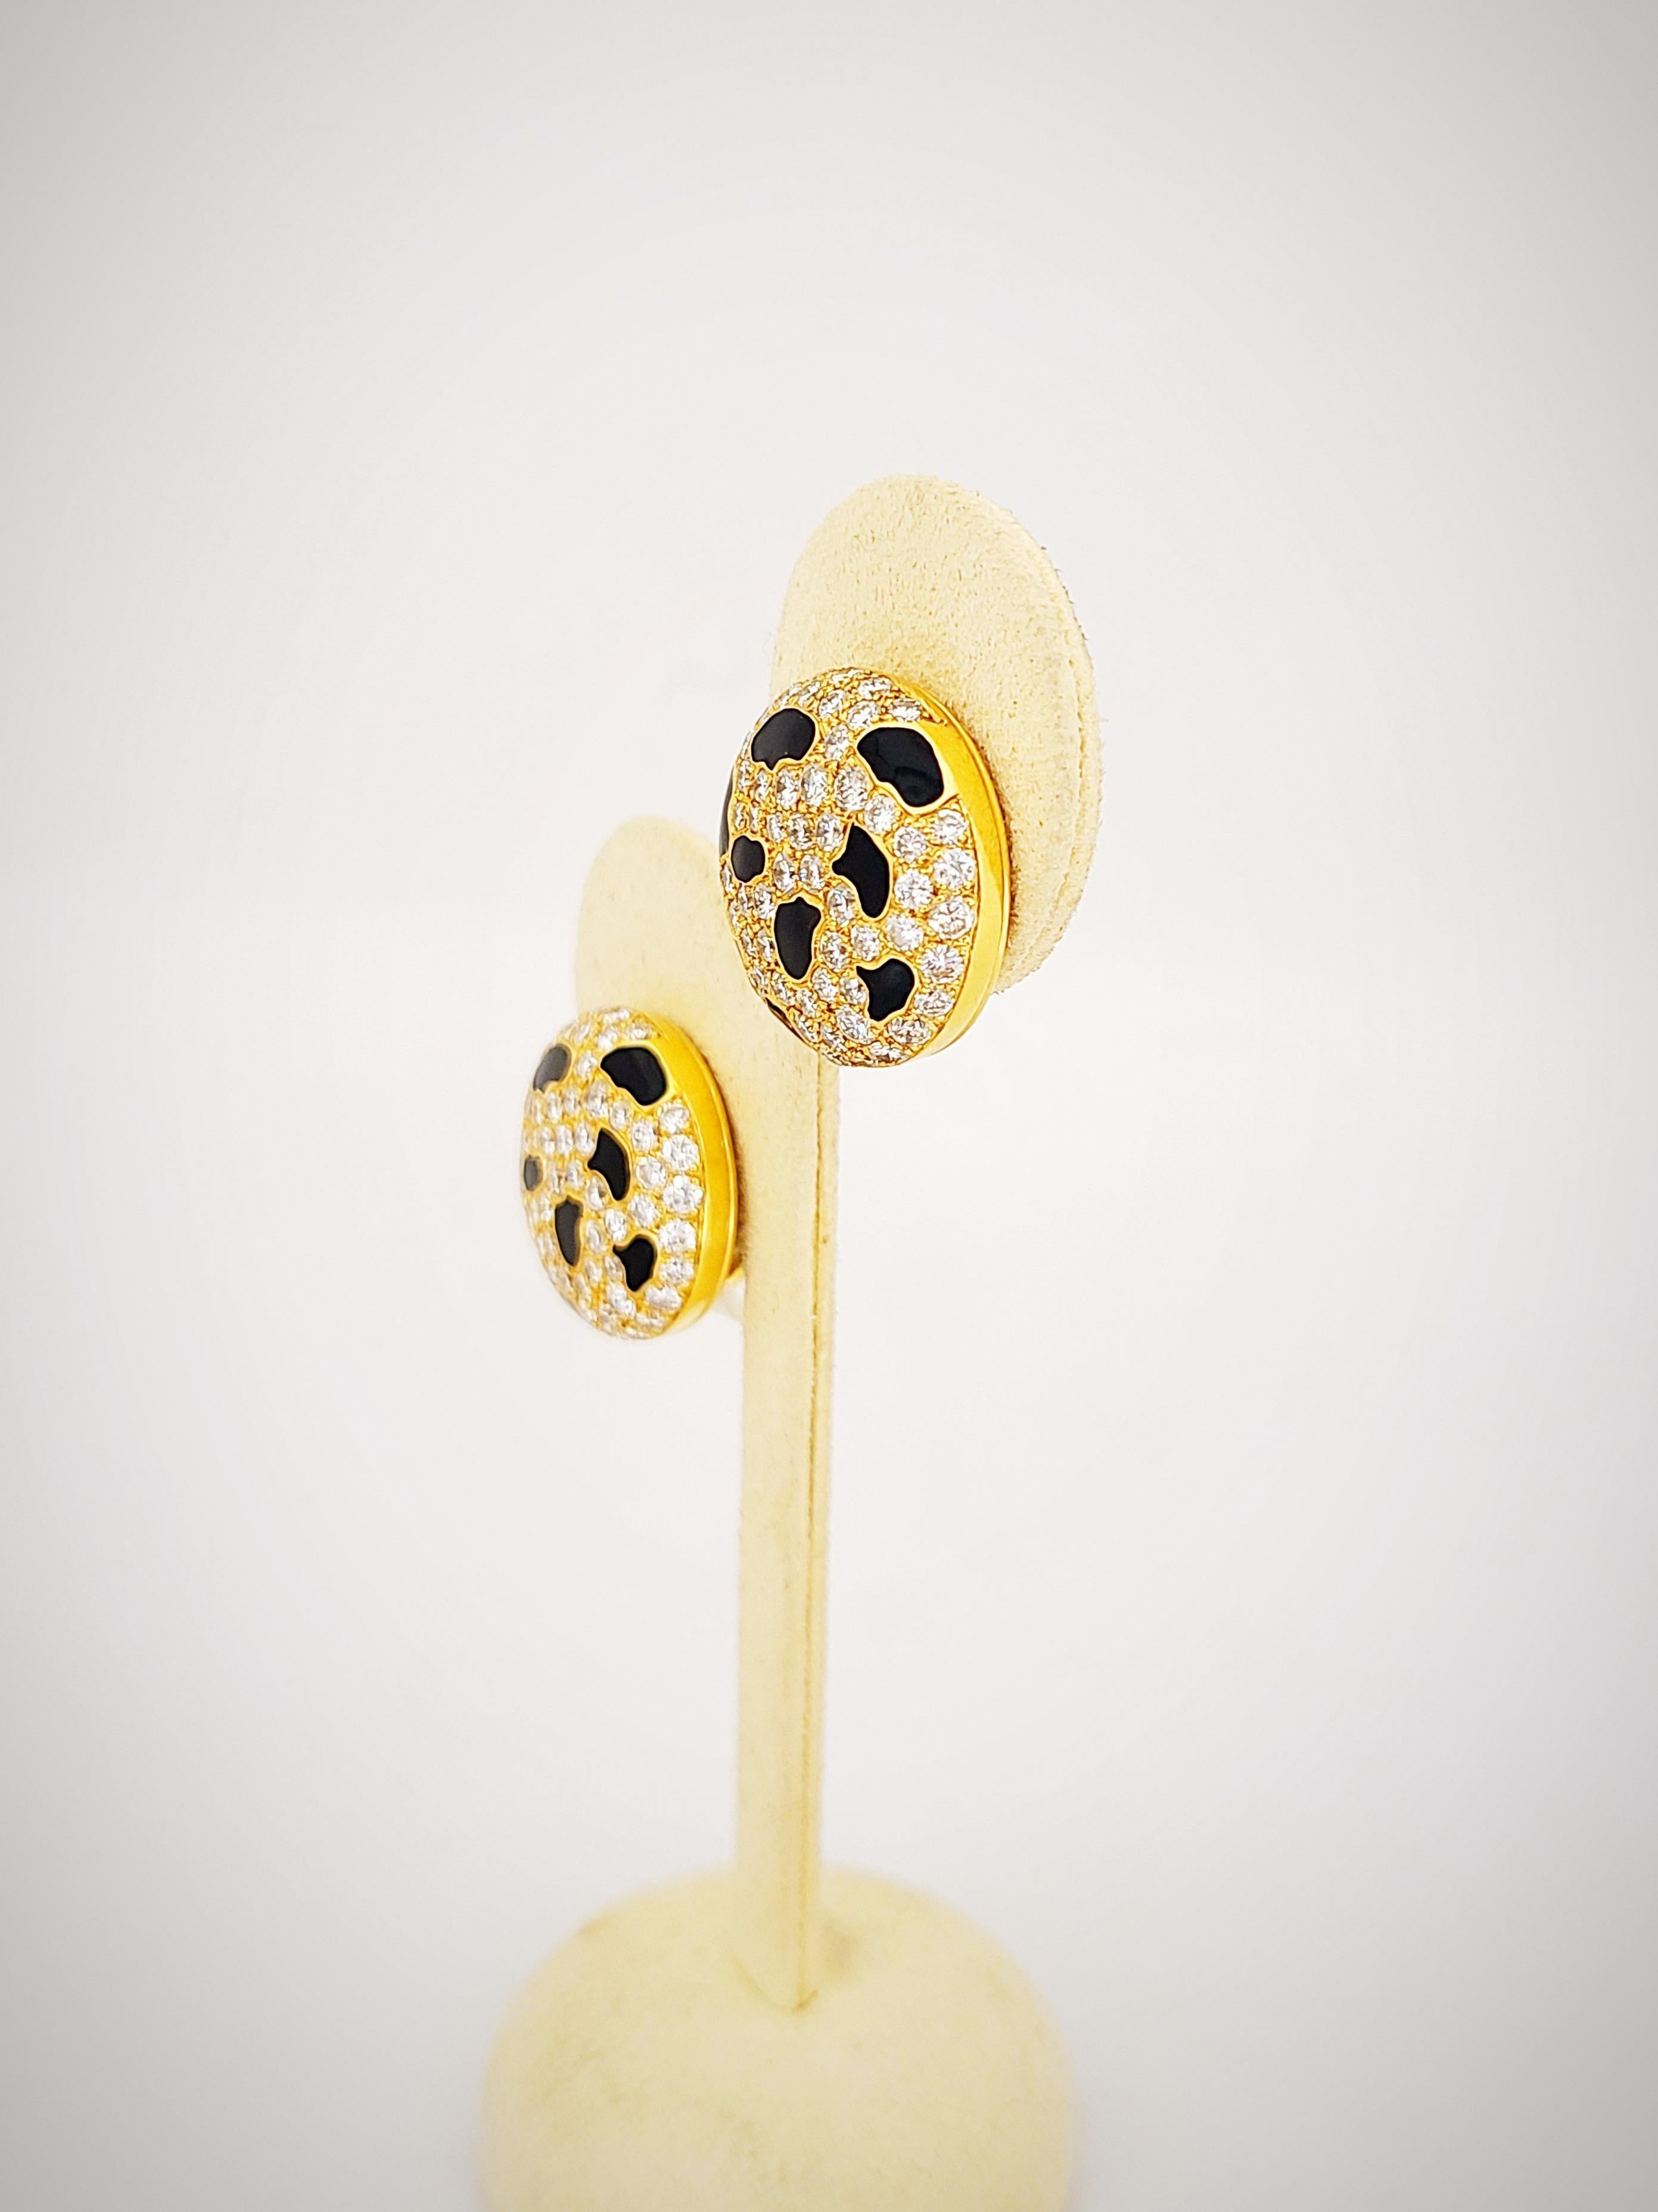 Contemporary Gay Freres 18KT. Yellow Gold, 4.64 Carat Diamond & Black Enamel Button Earrings For Sale